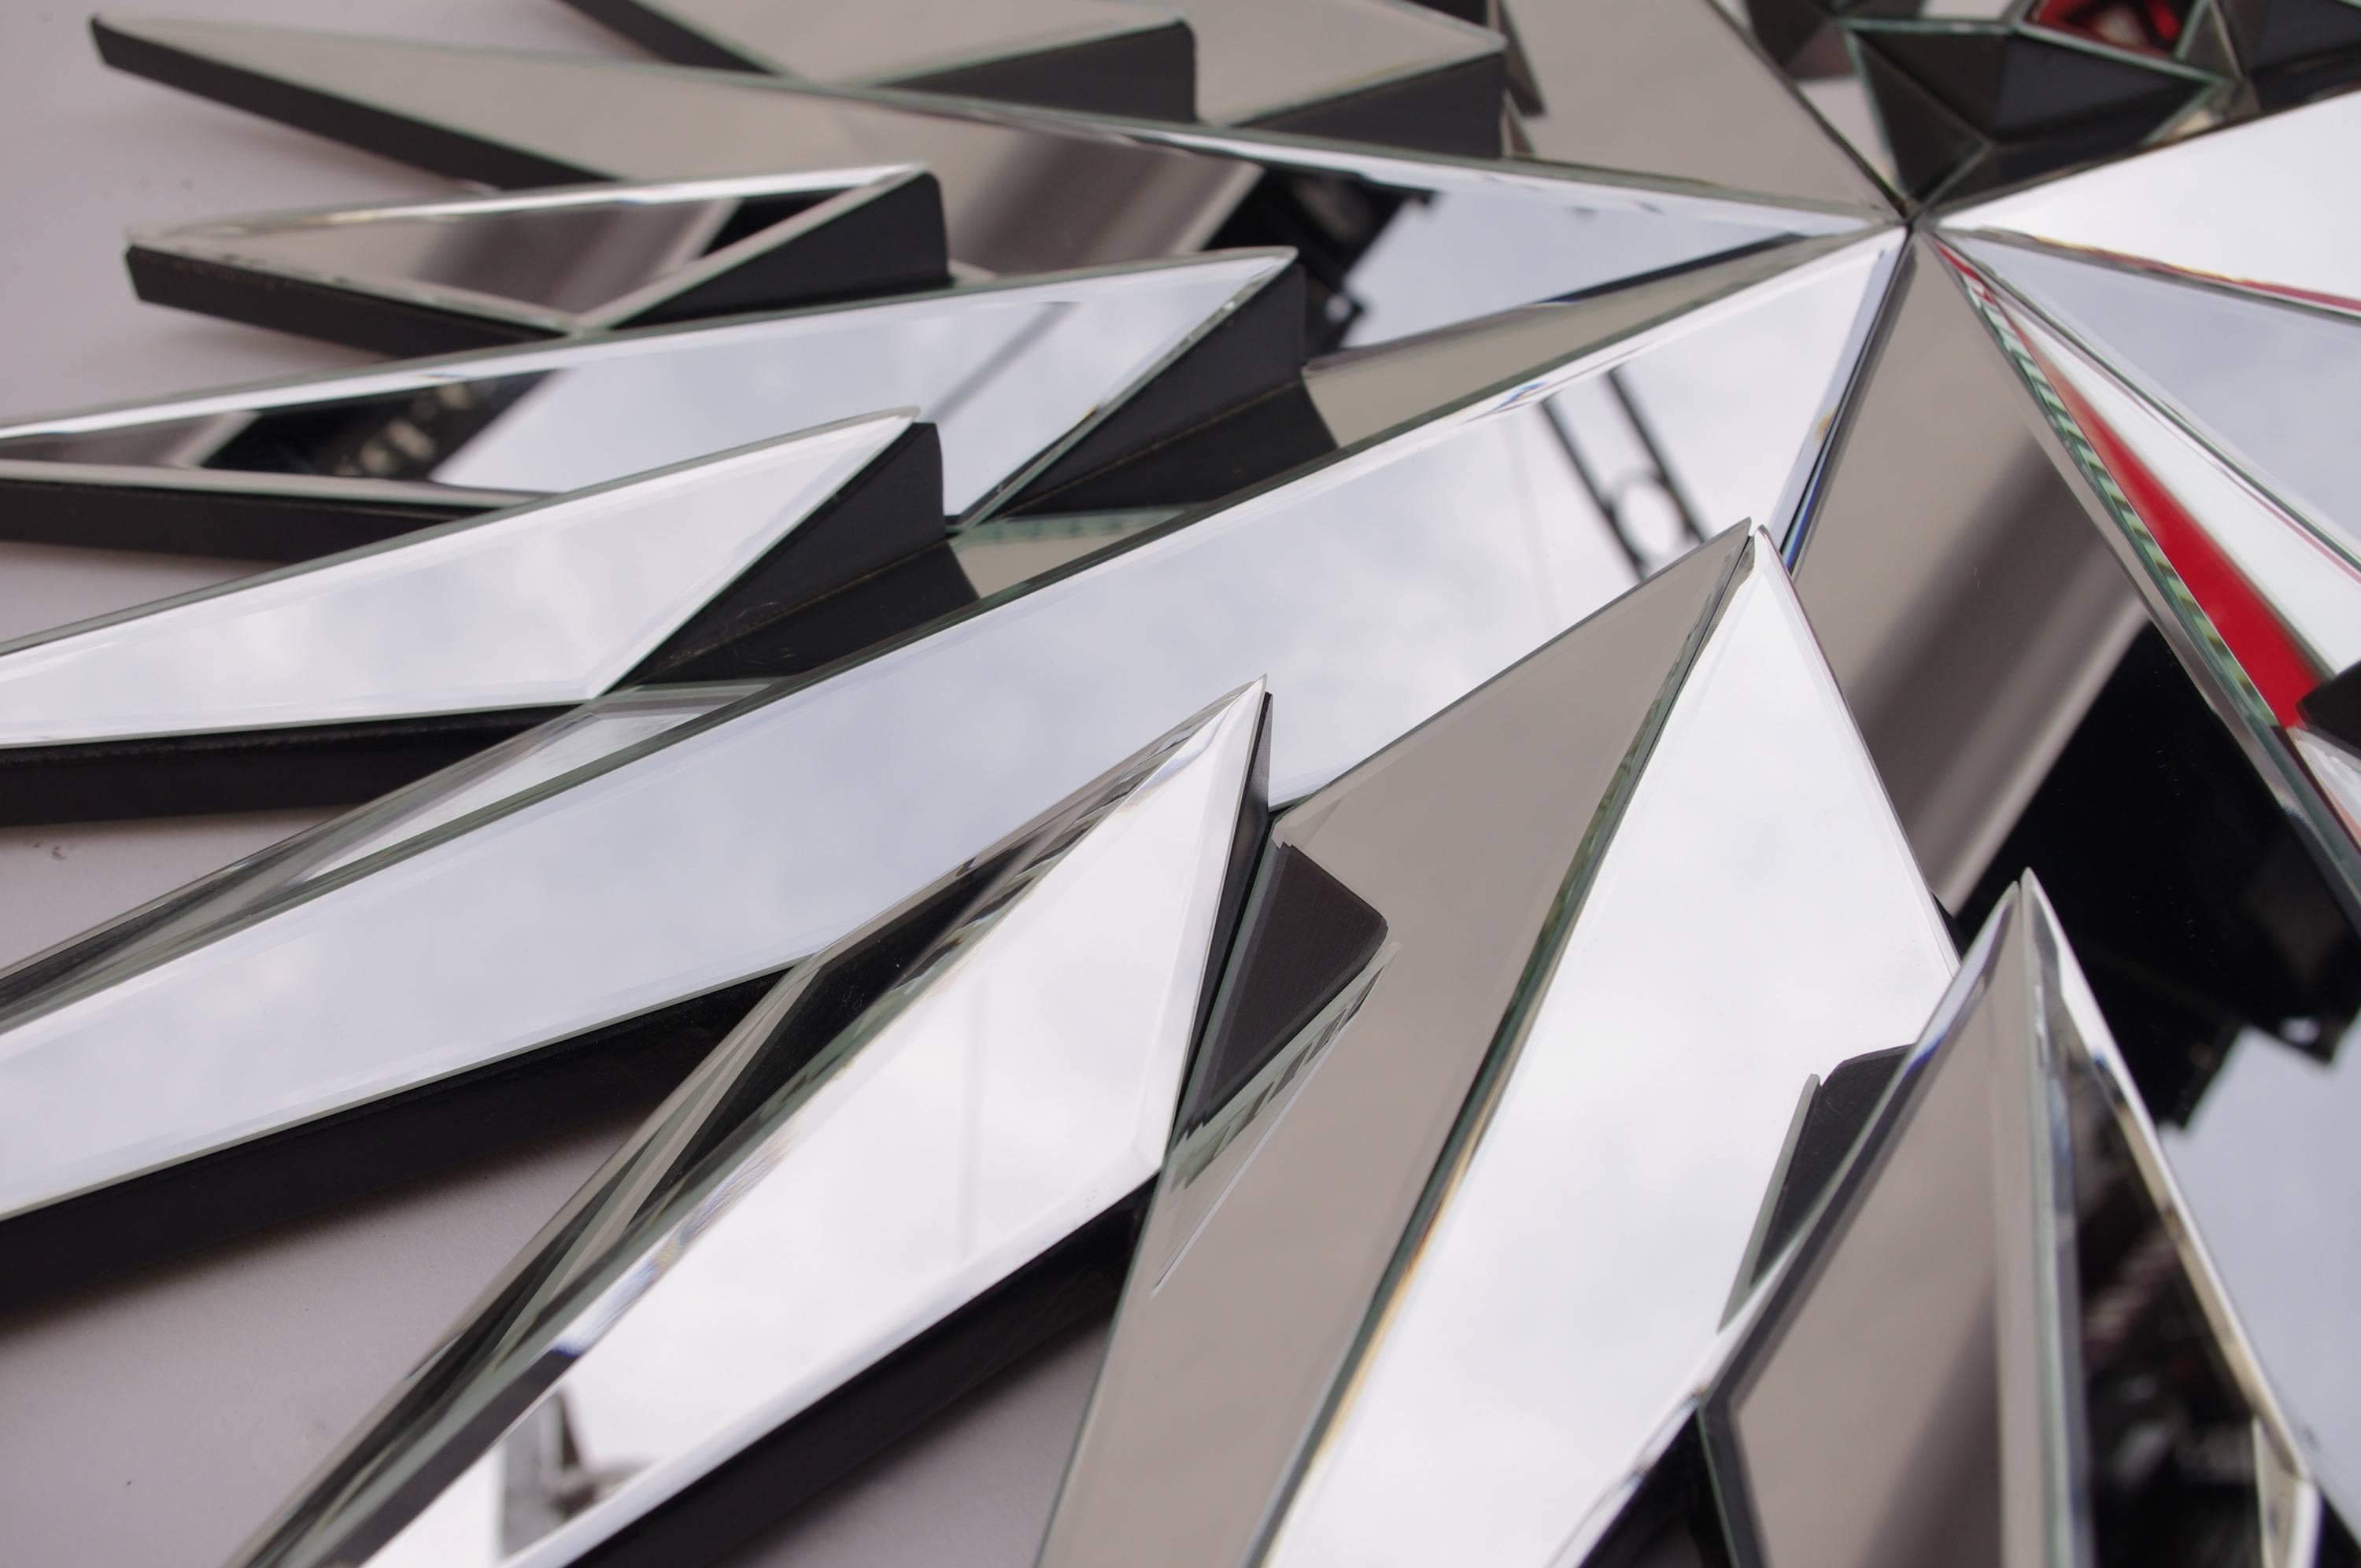 Modern Faceted star-shaped mirror, contemporary work